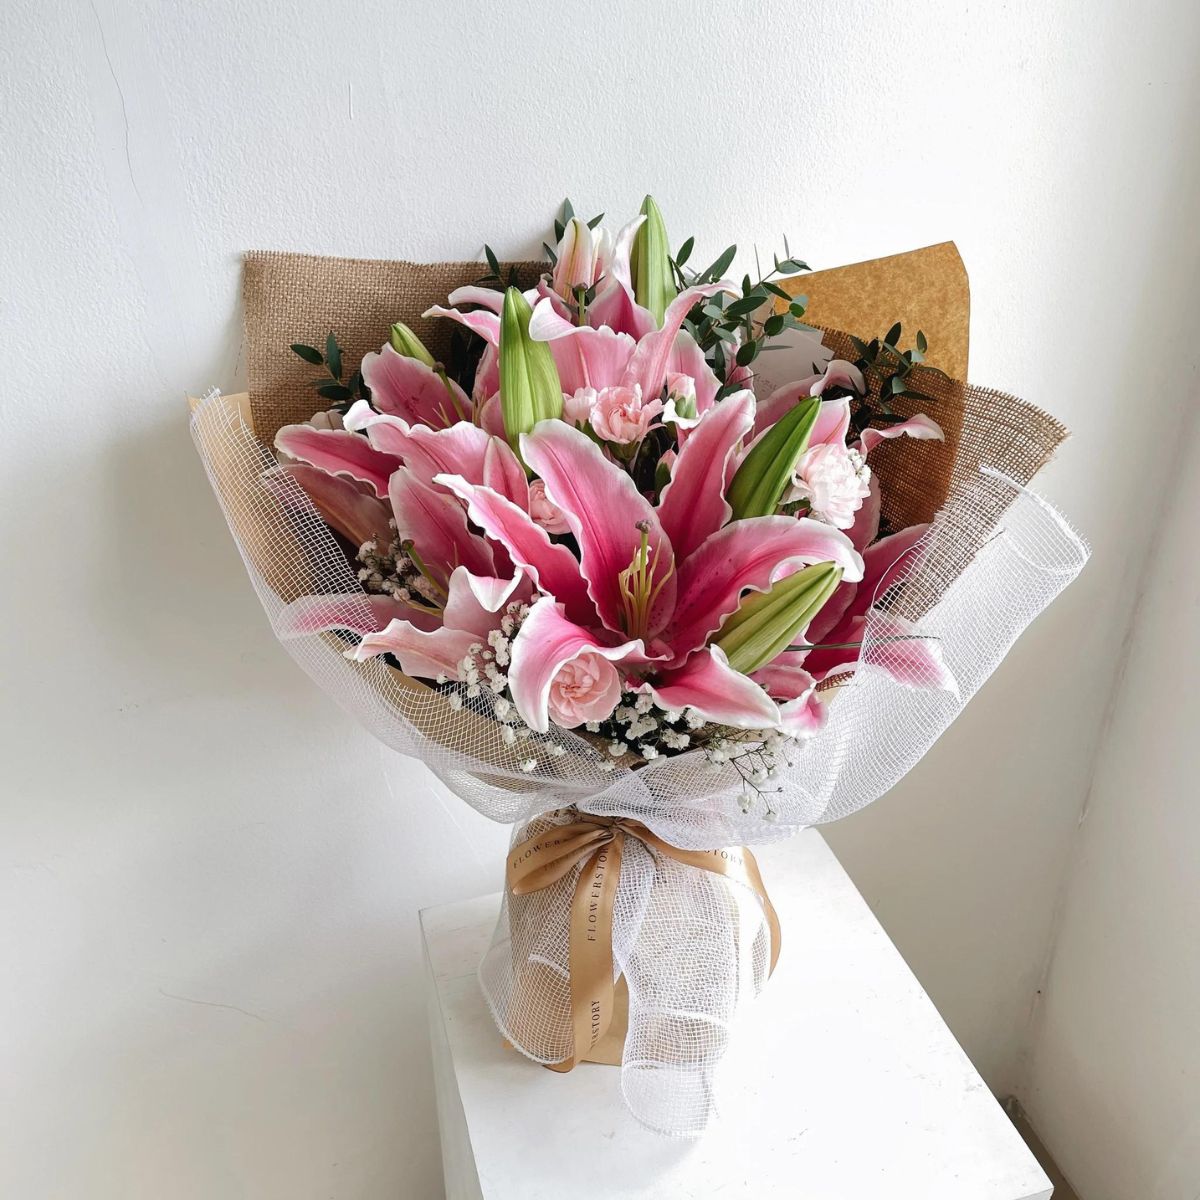 Lily flower bouquet for vday